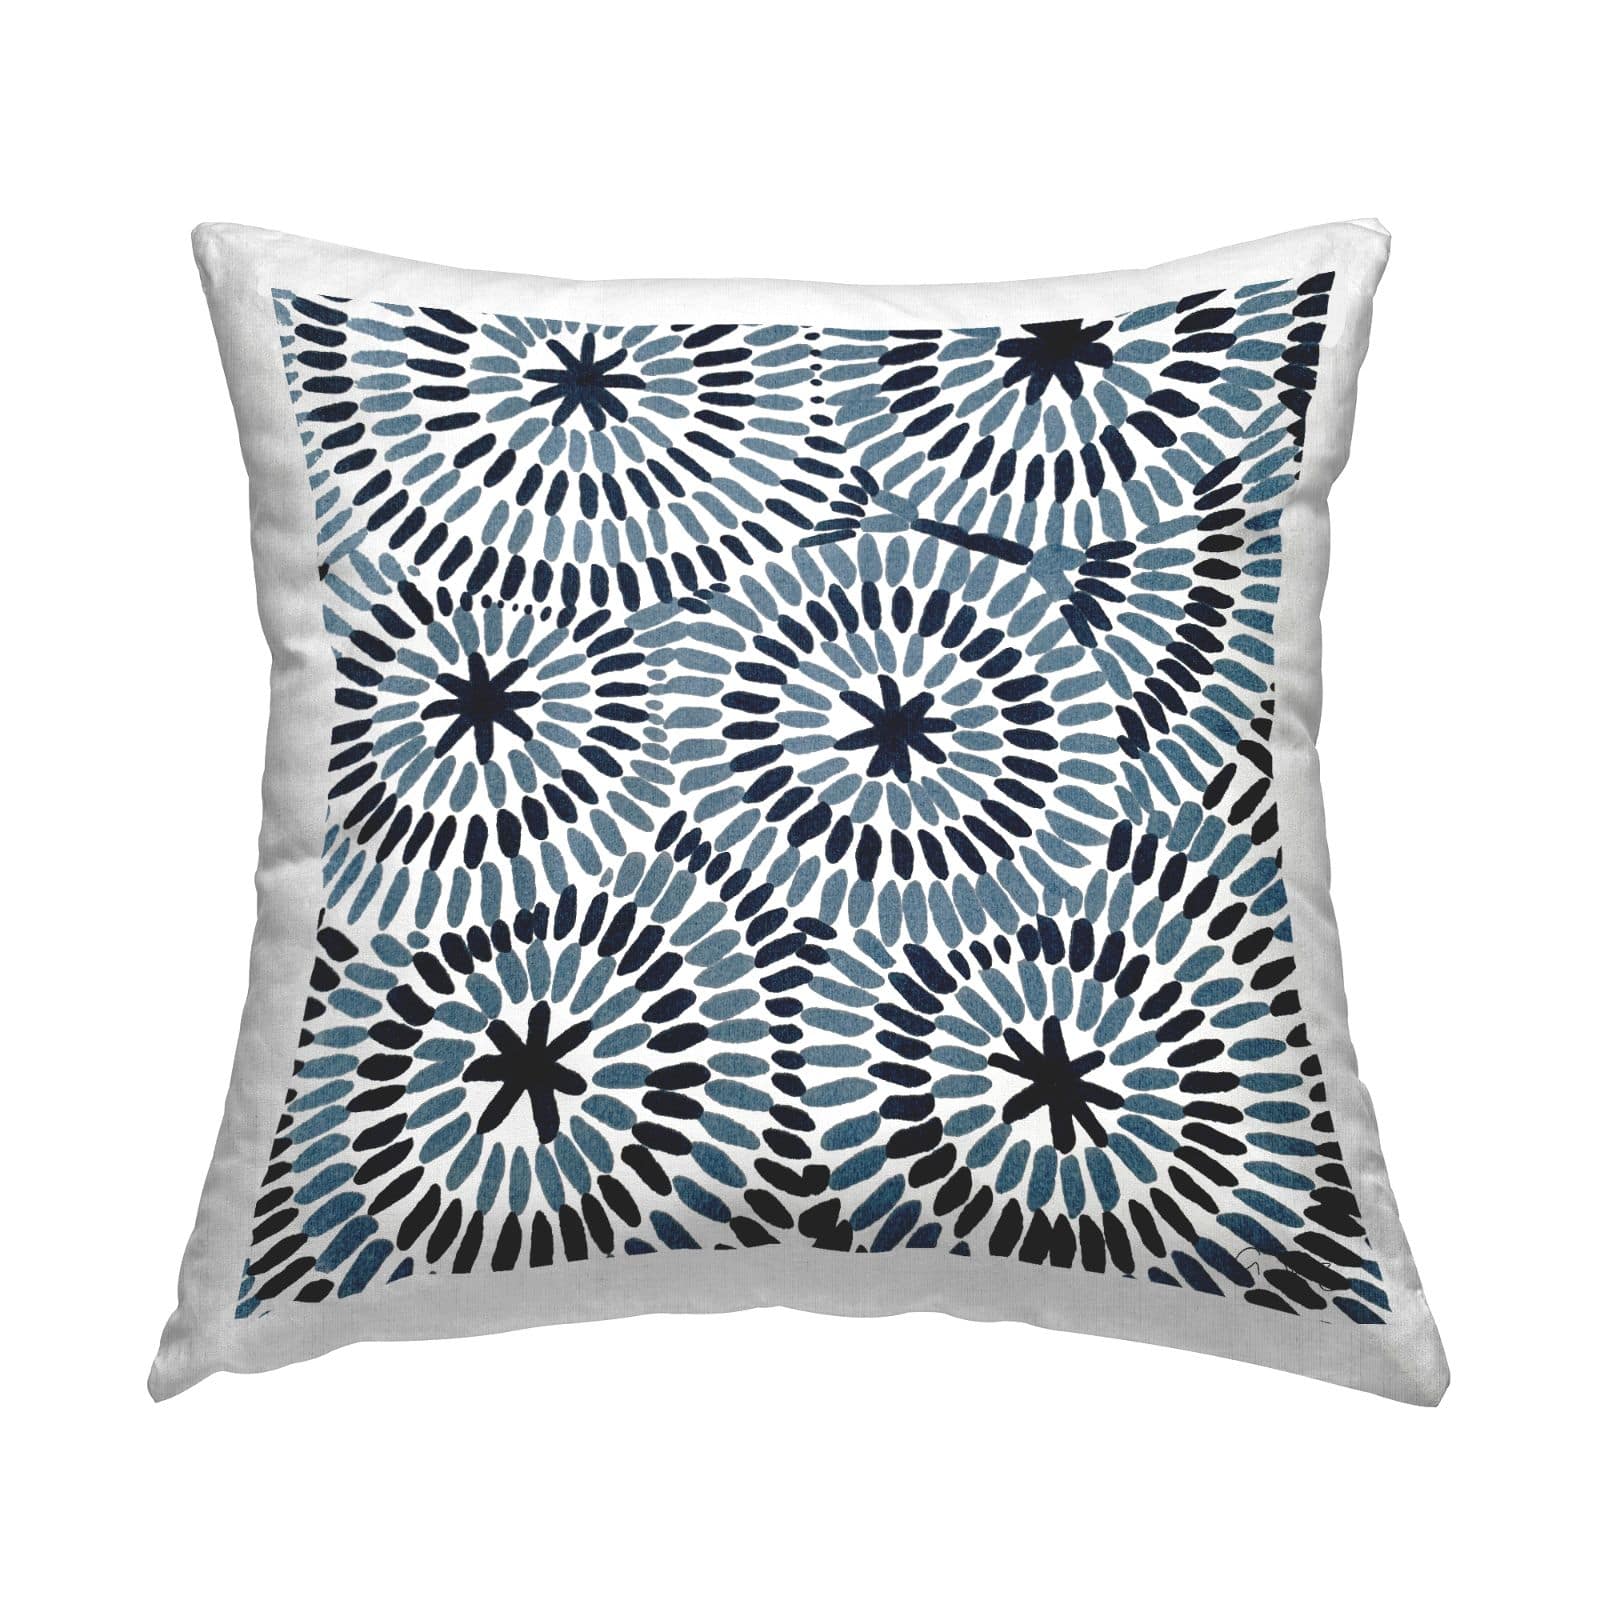 Stupell Industries Geometric Circles Layered Abstract Pattern Design by Ale Saiz Studio Throw Pillow